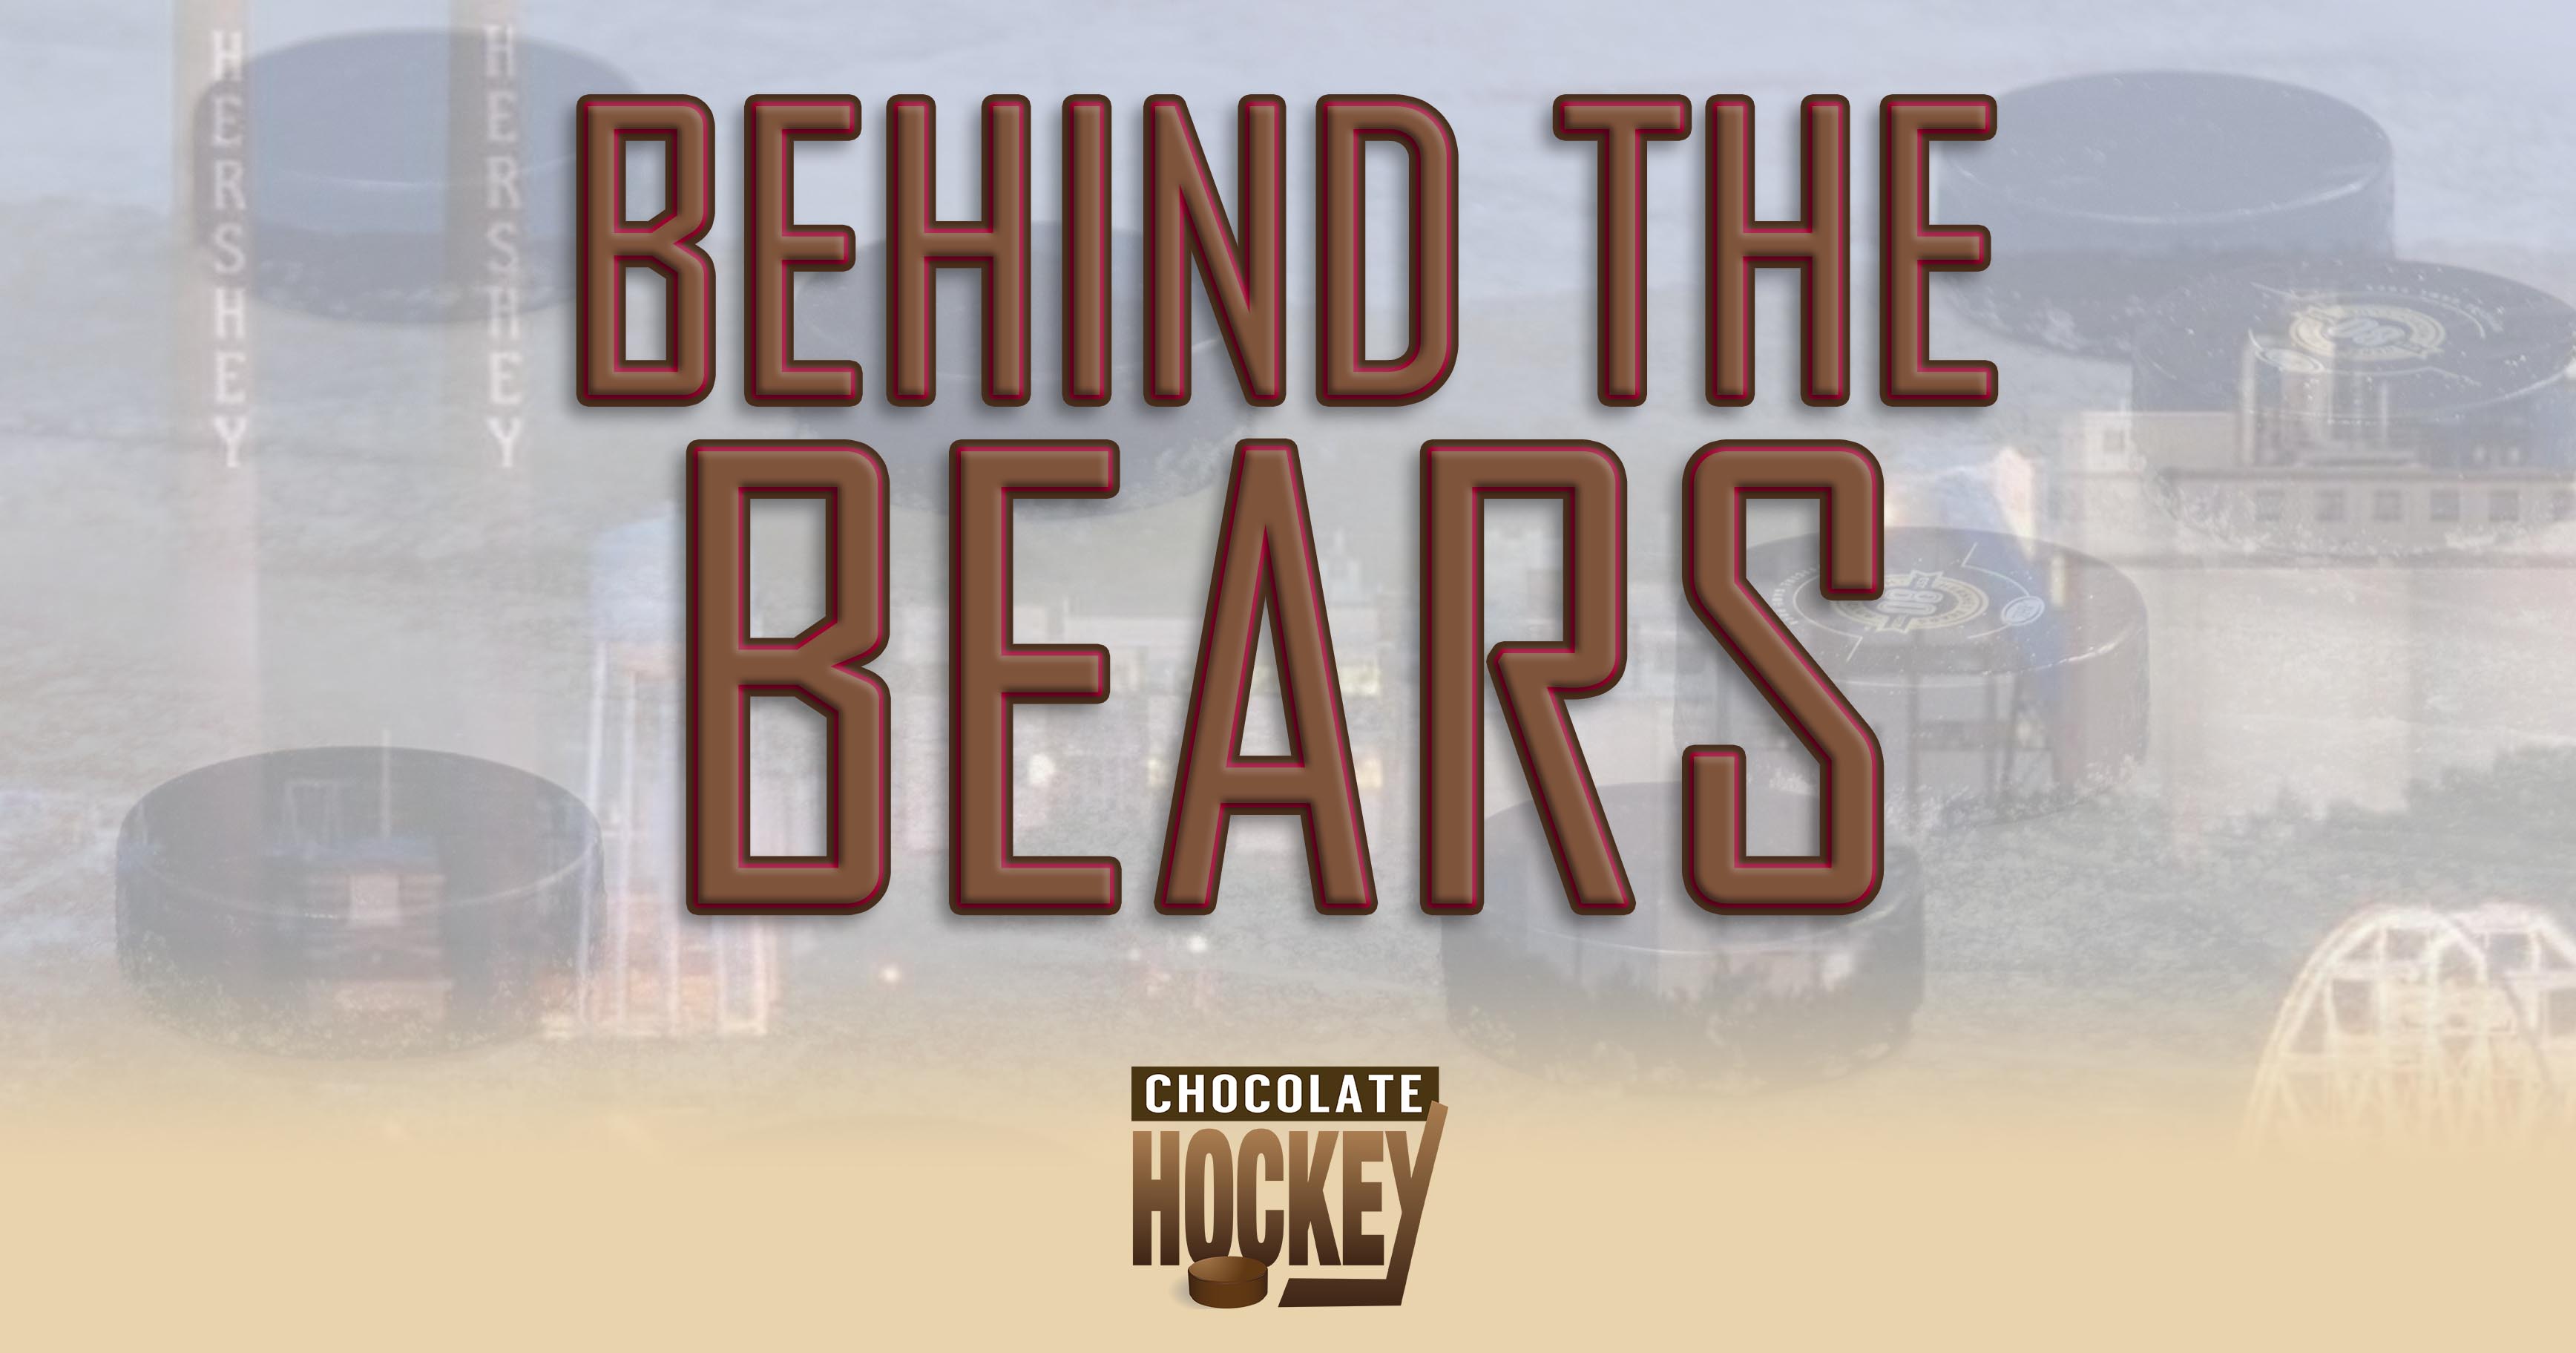 New Hershey Bears Podcast “Behind The Bears” Takes You Deep Into Stories Around The Bears